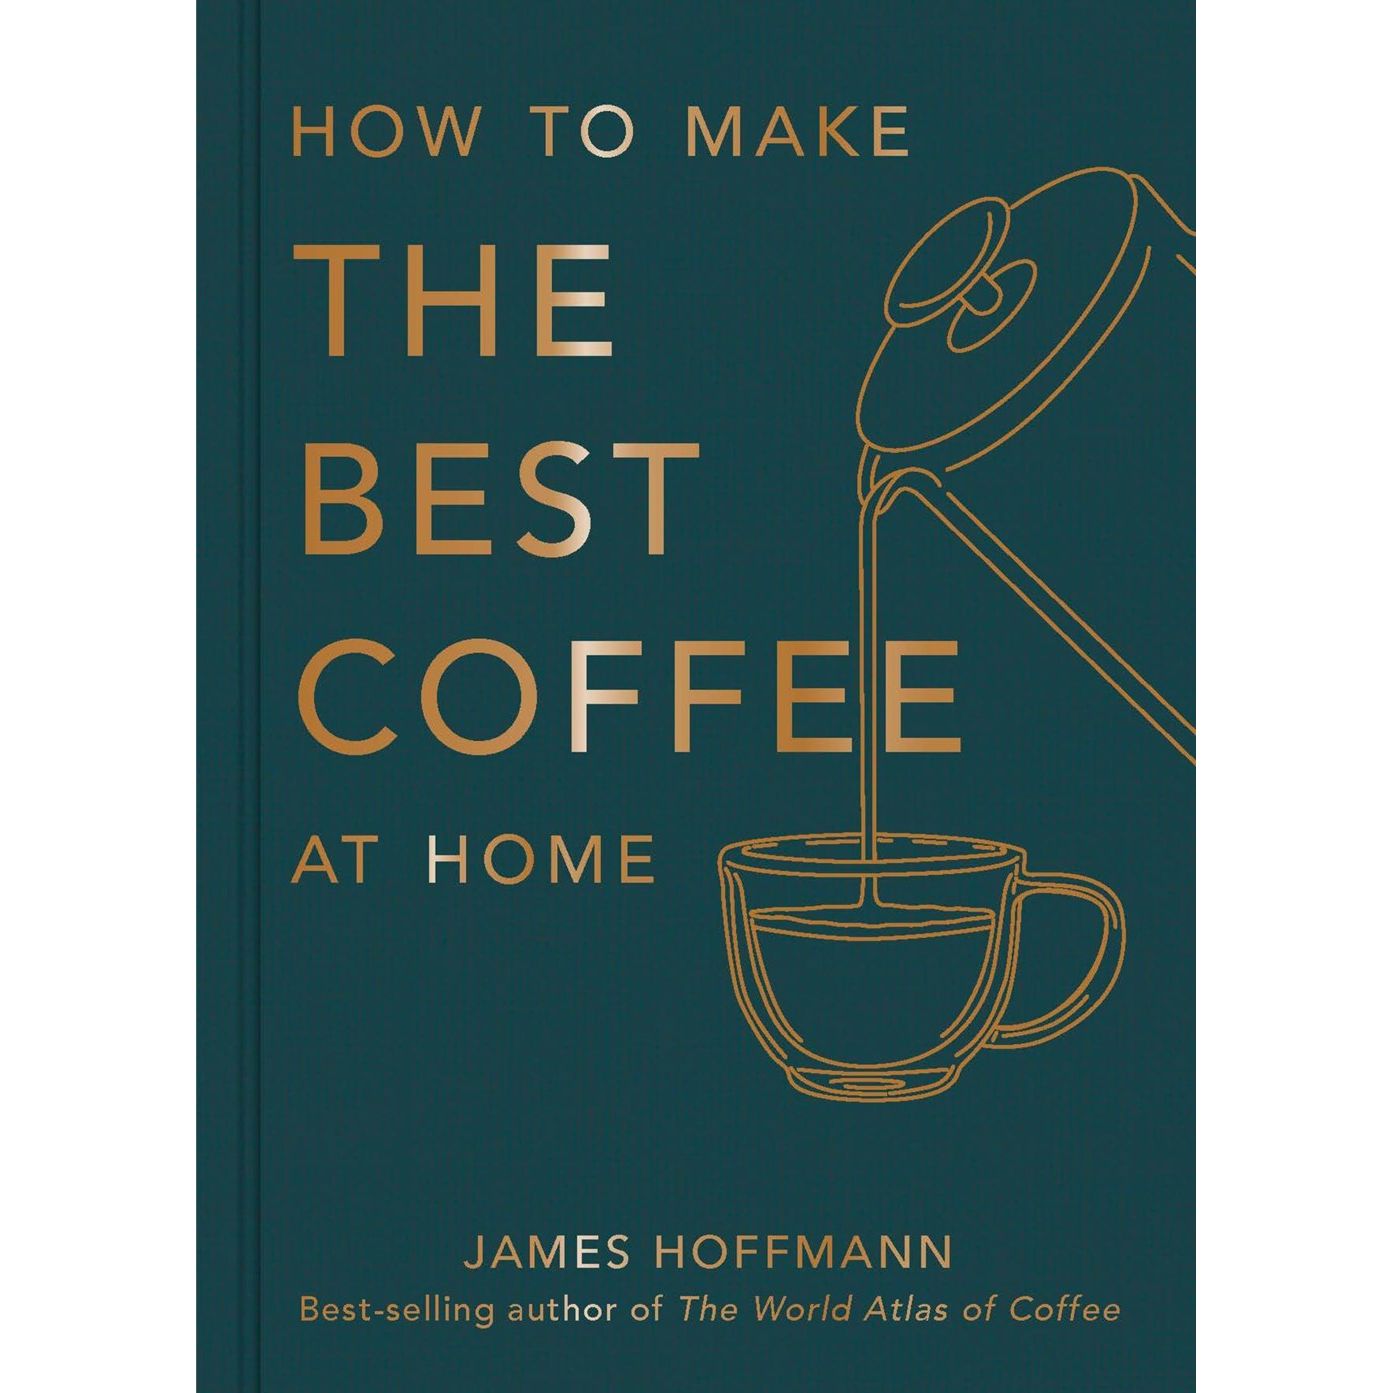 How to Make the Best Coffee At Home (James Hoffman)